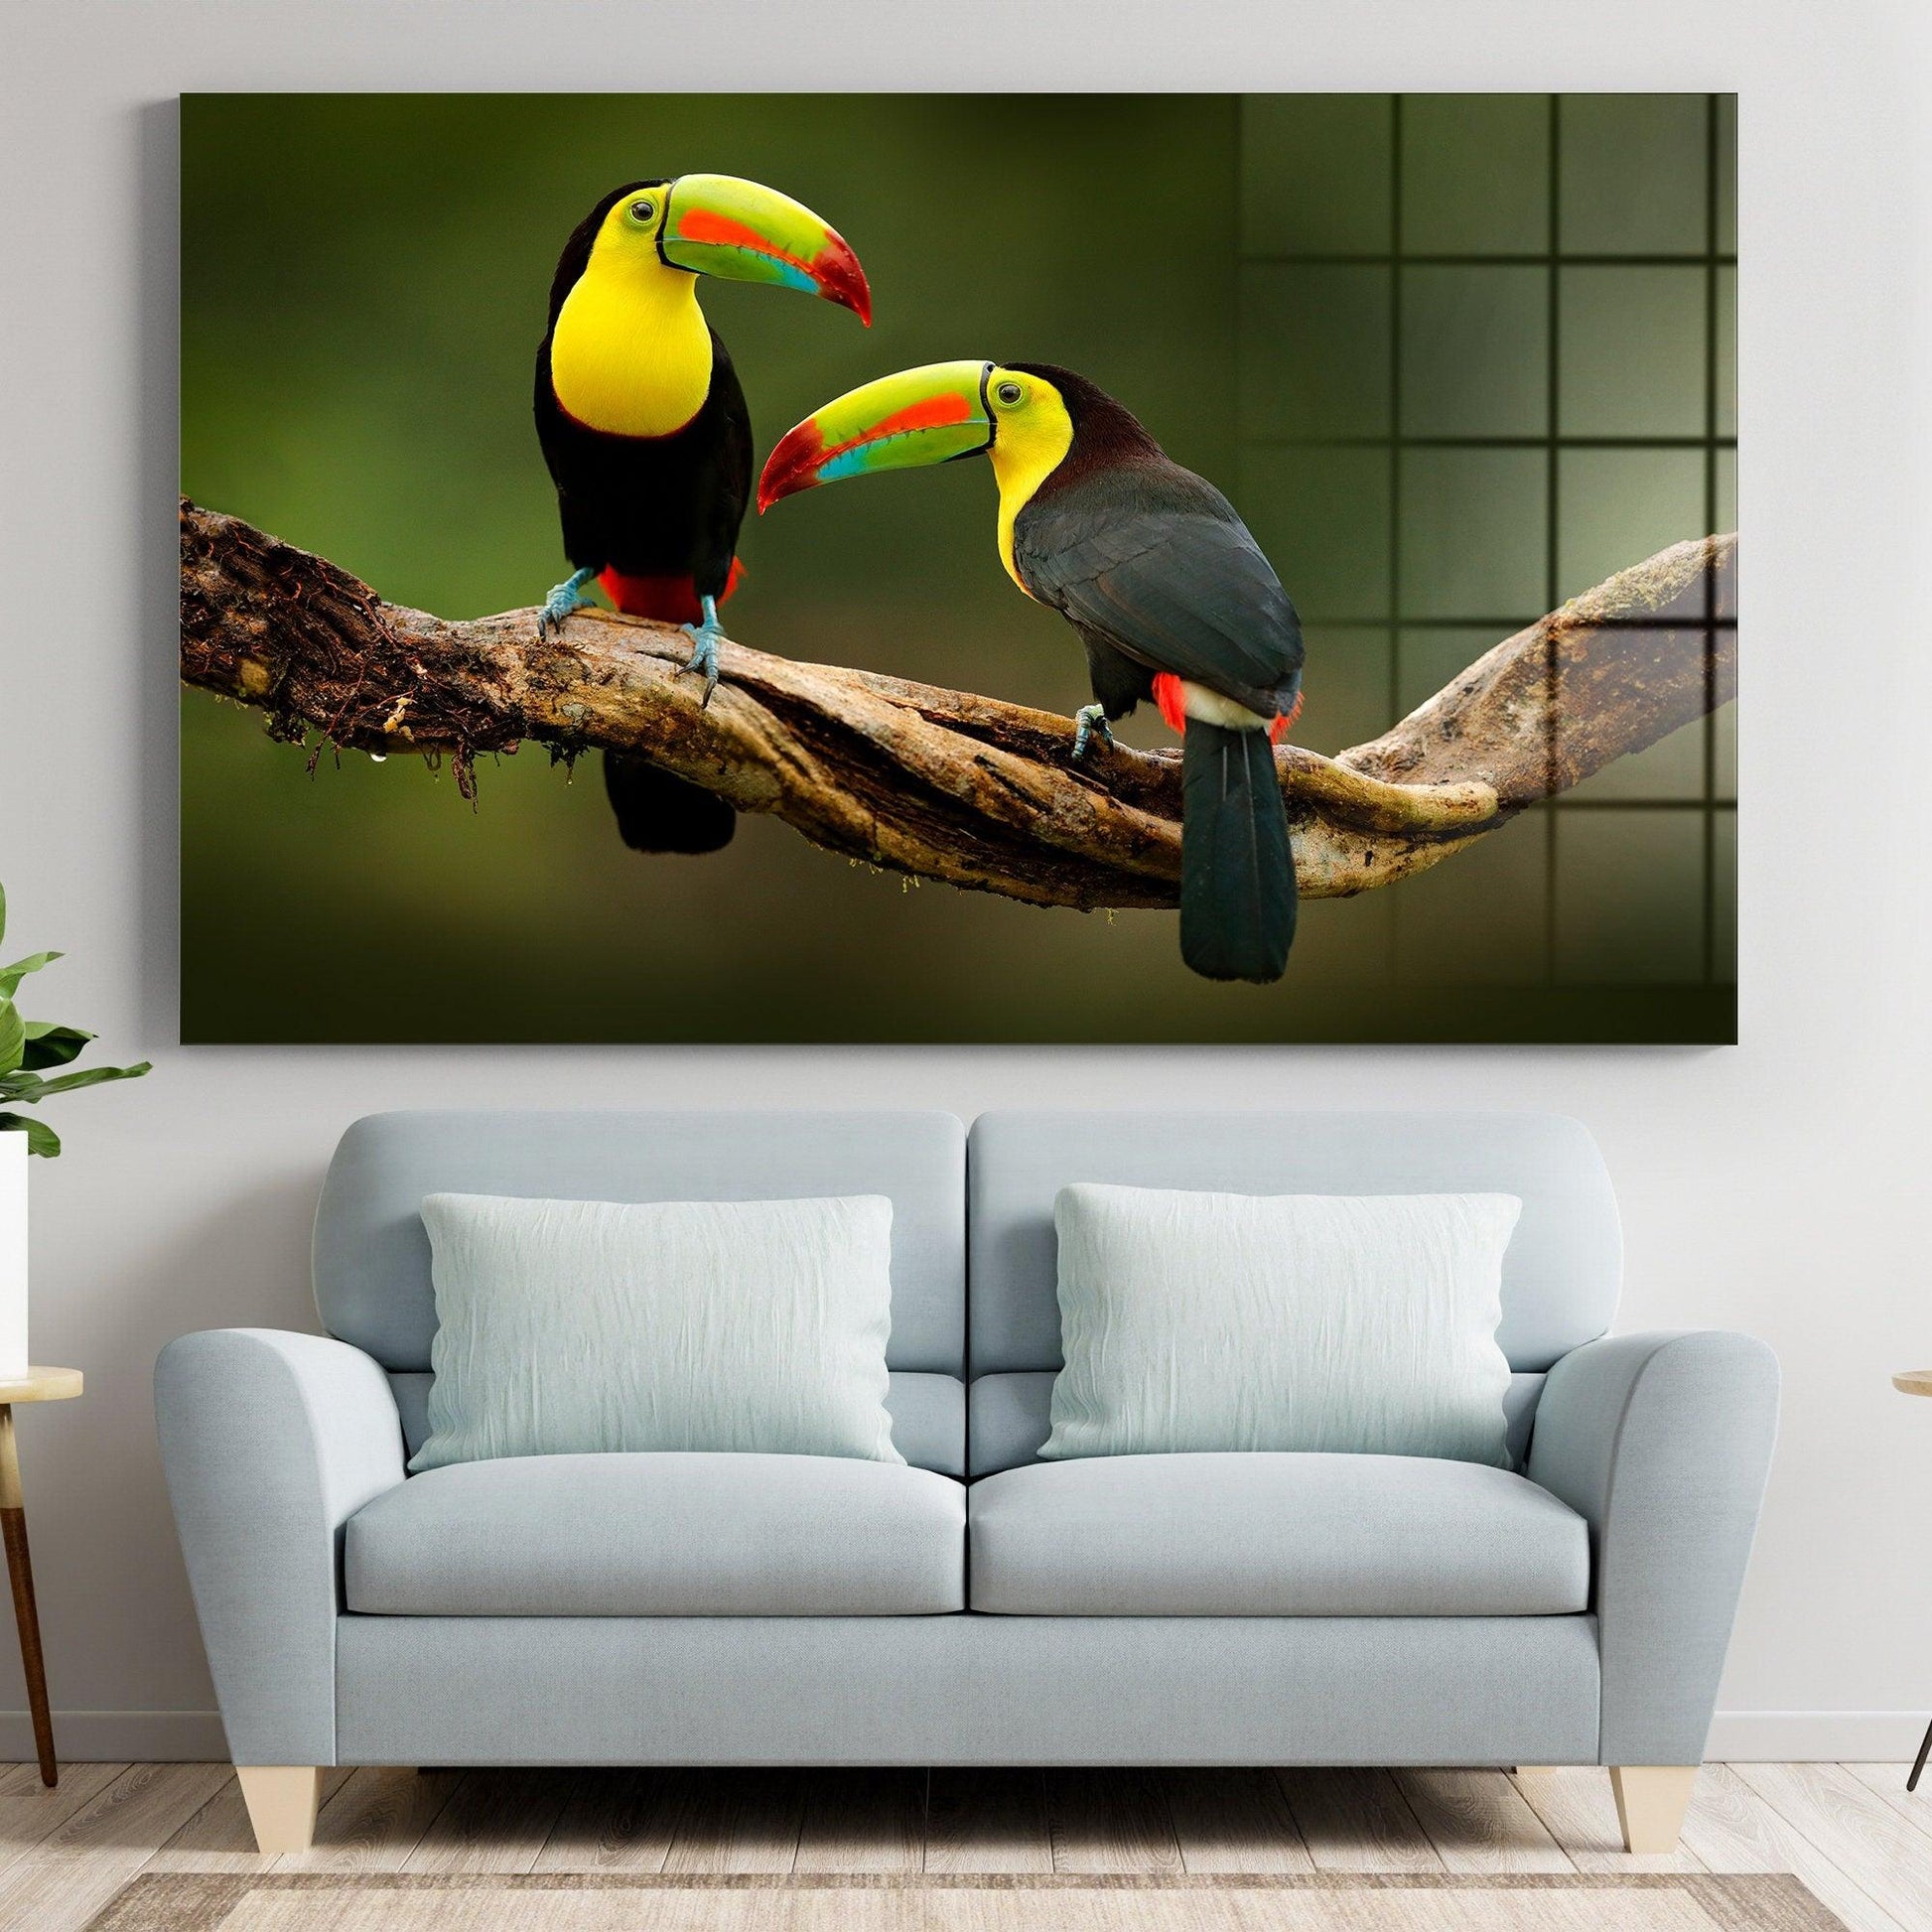 Colored Parrot Birds Canvas Wall Art Print| Poster Print Decor for Home & Office Decoration, Poster or READY TO HANG, watercolor animals